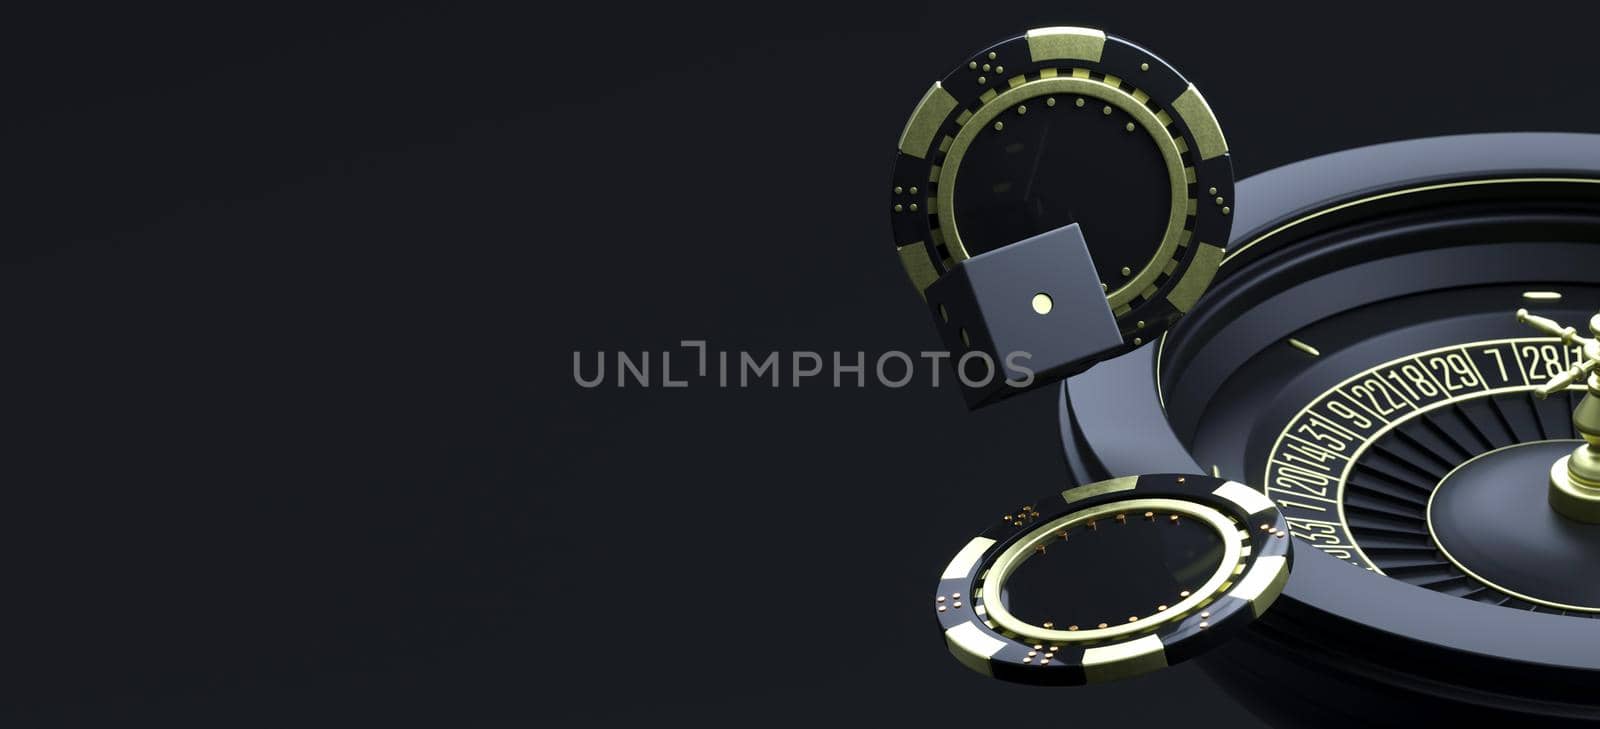 Modern casino background with place for text. Luxury casino roulette wheel on black background with copy space. Online casino theme. Poker game table. 3d rendering. by Dvorak